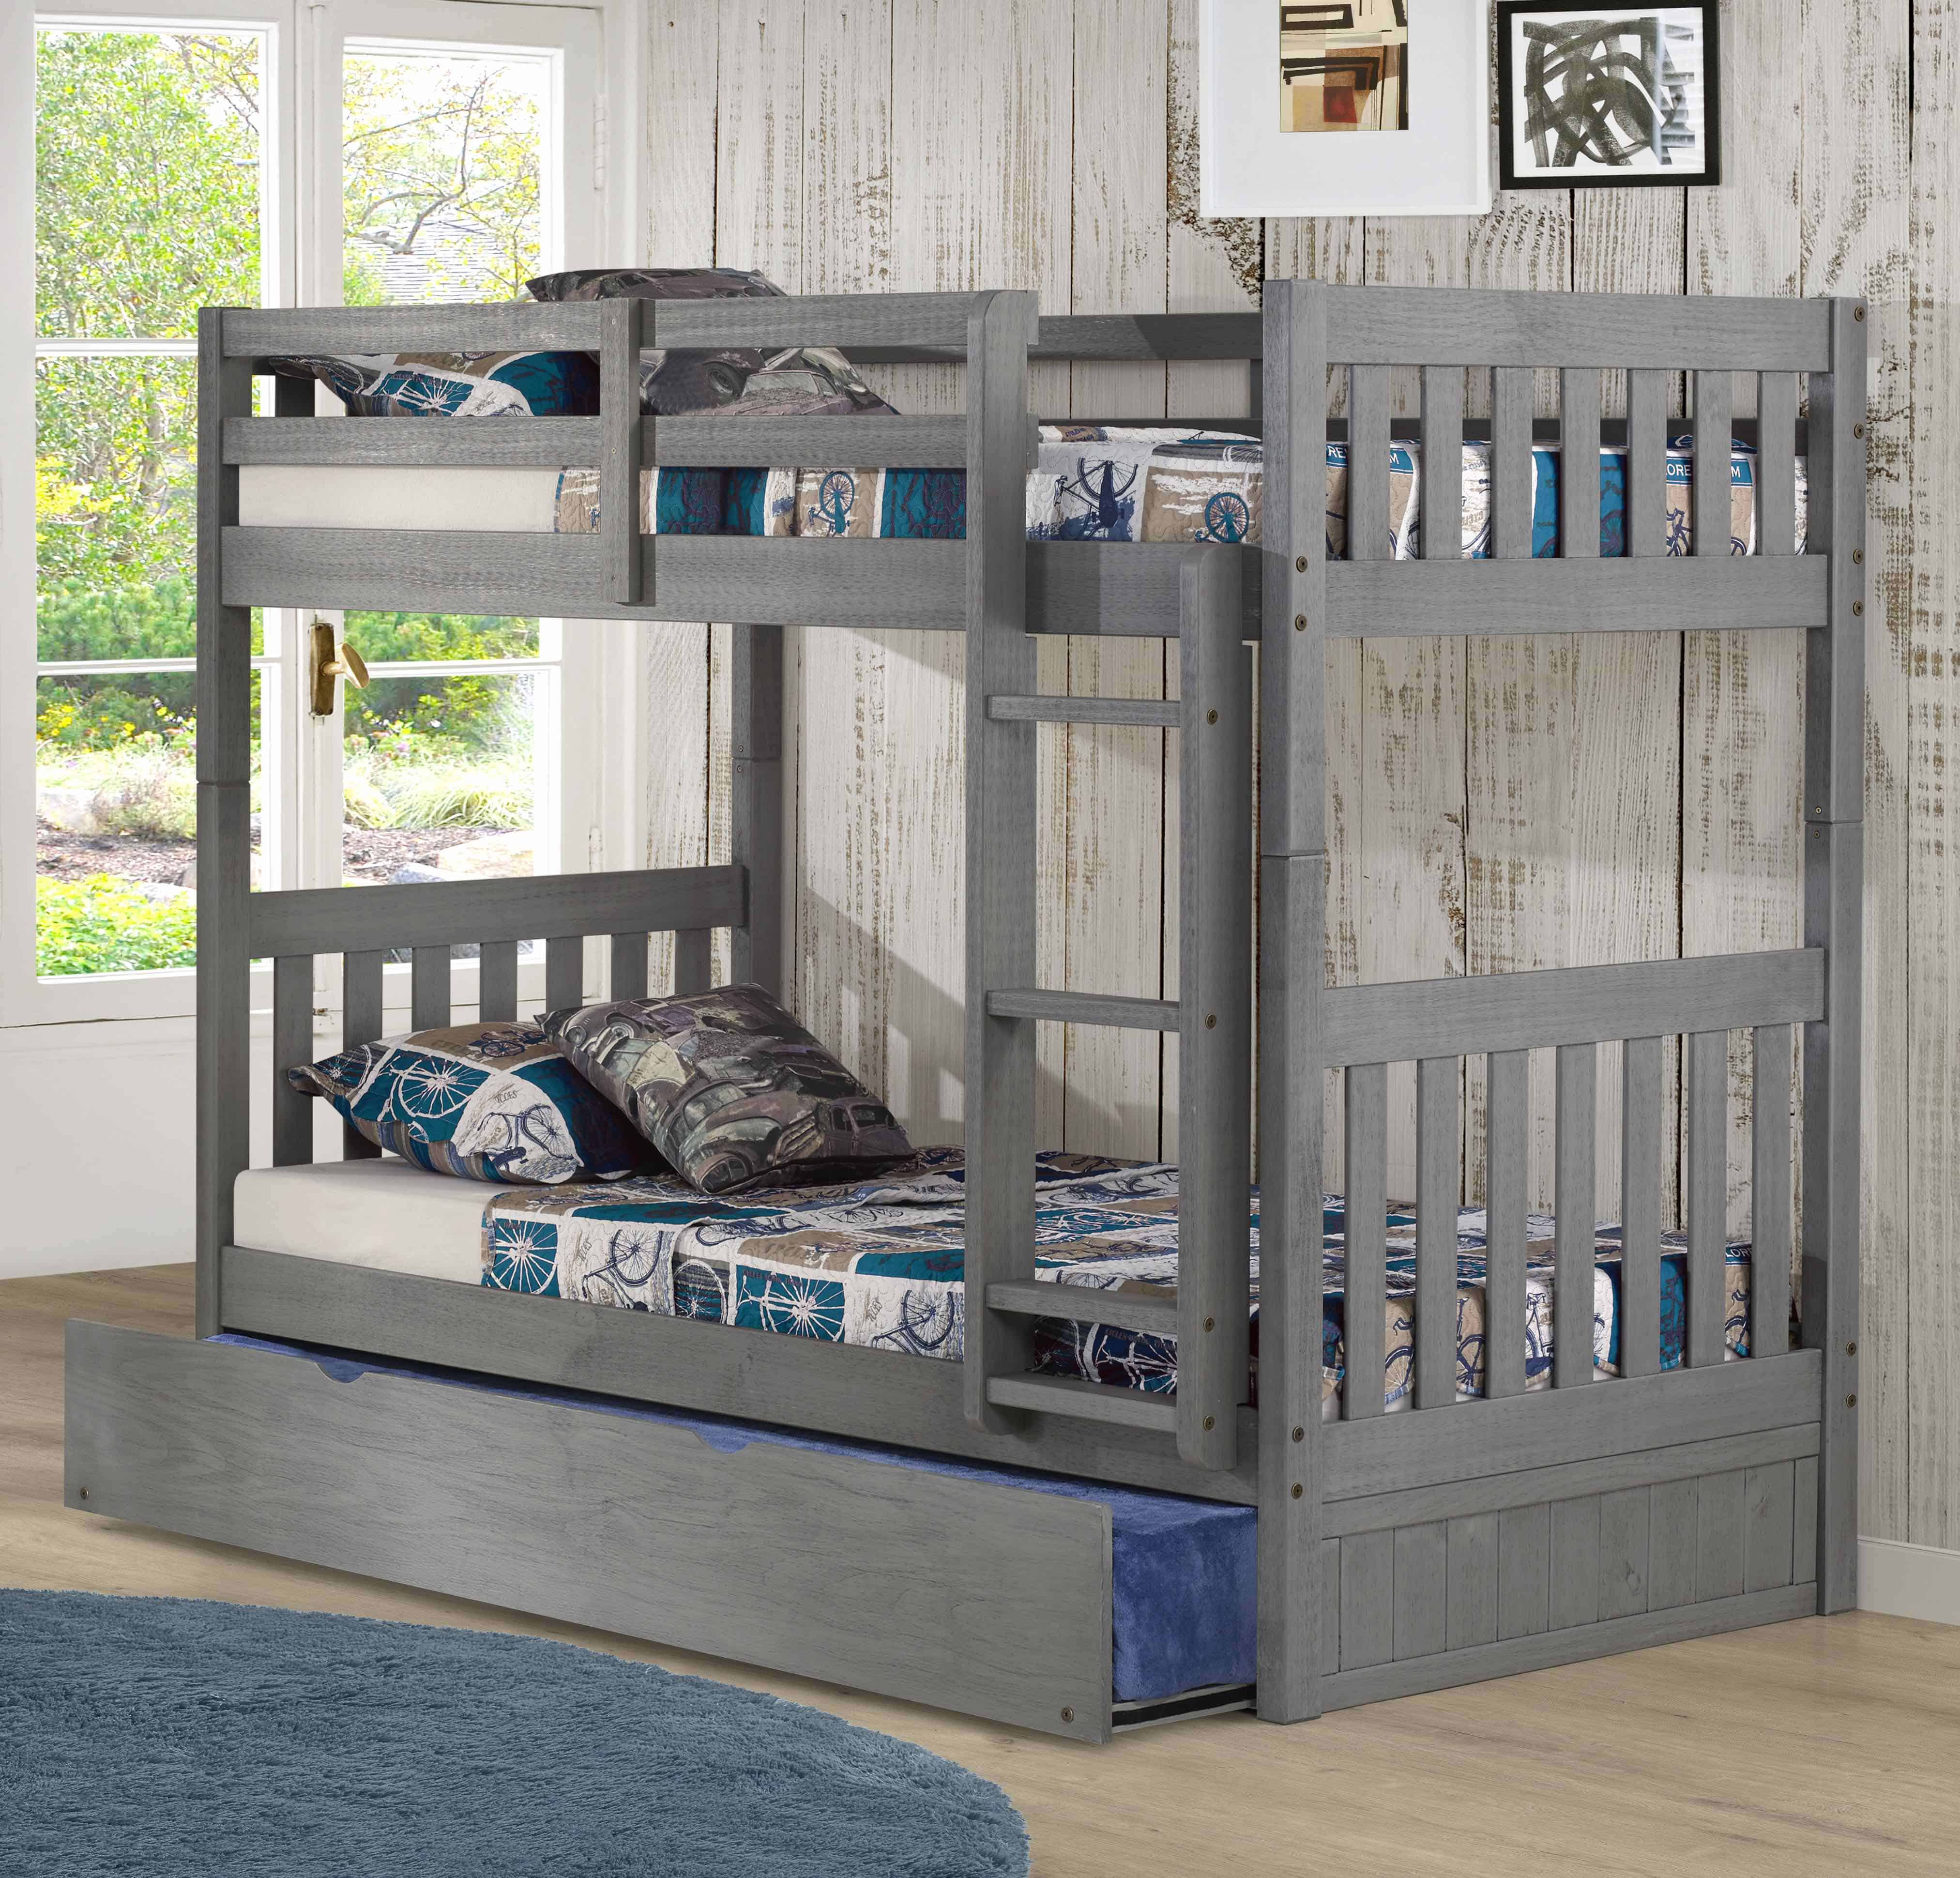 Discovery World Furniture Twin Over, Discovery World Furniture Bunk Bed Reviews